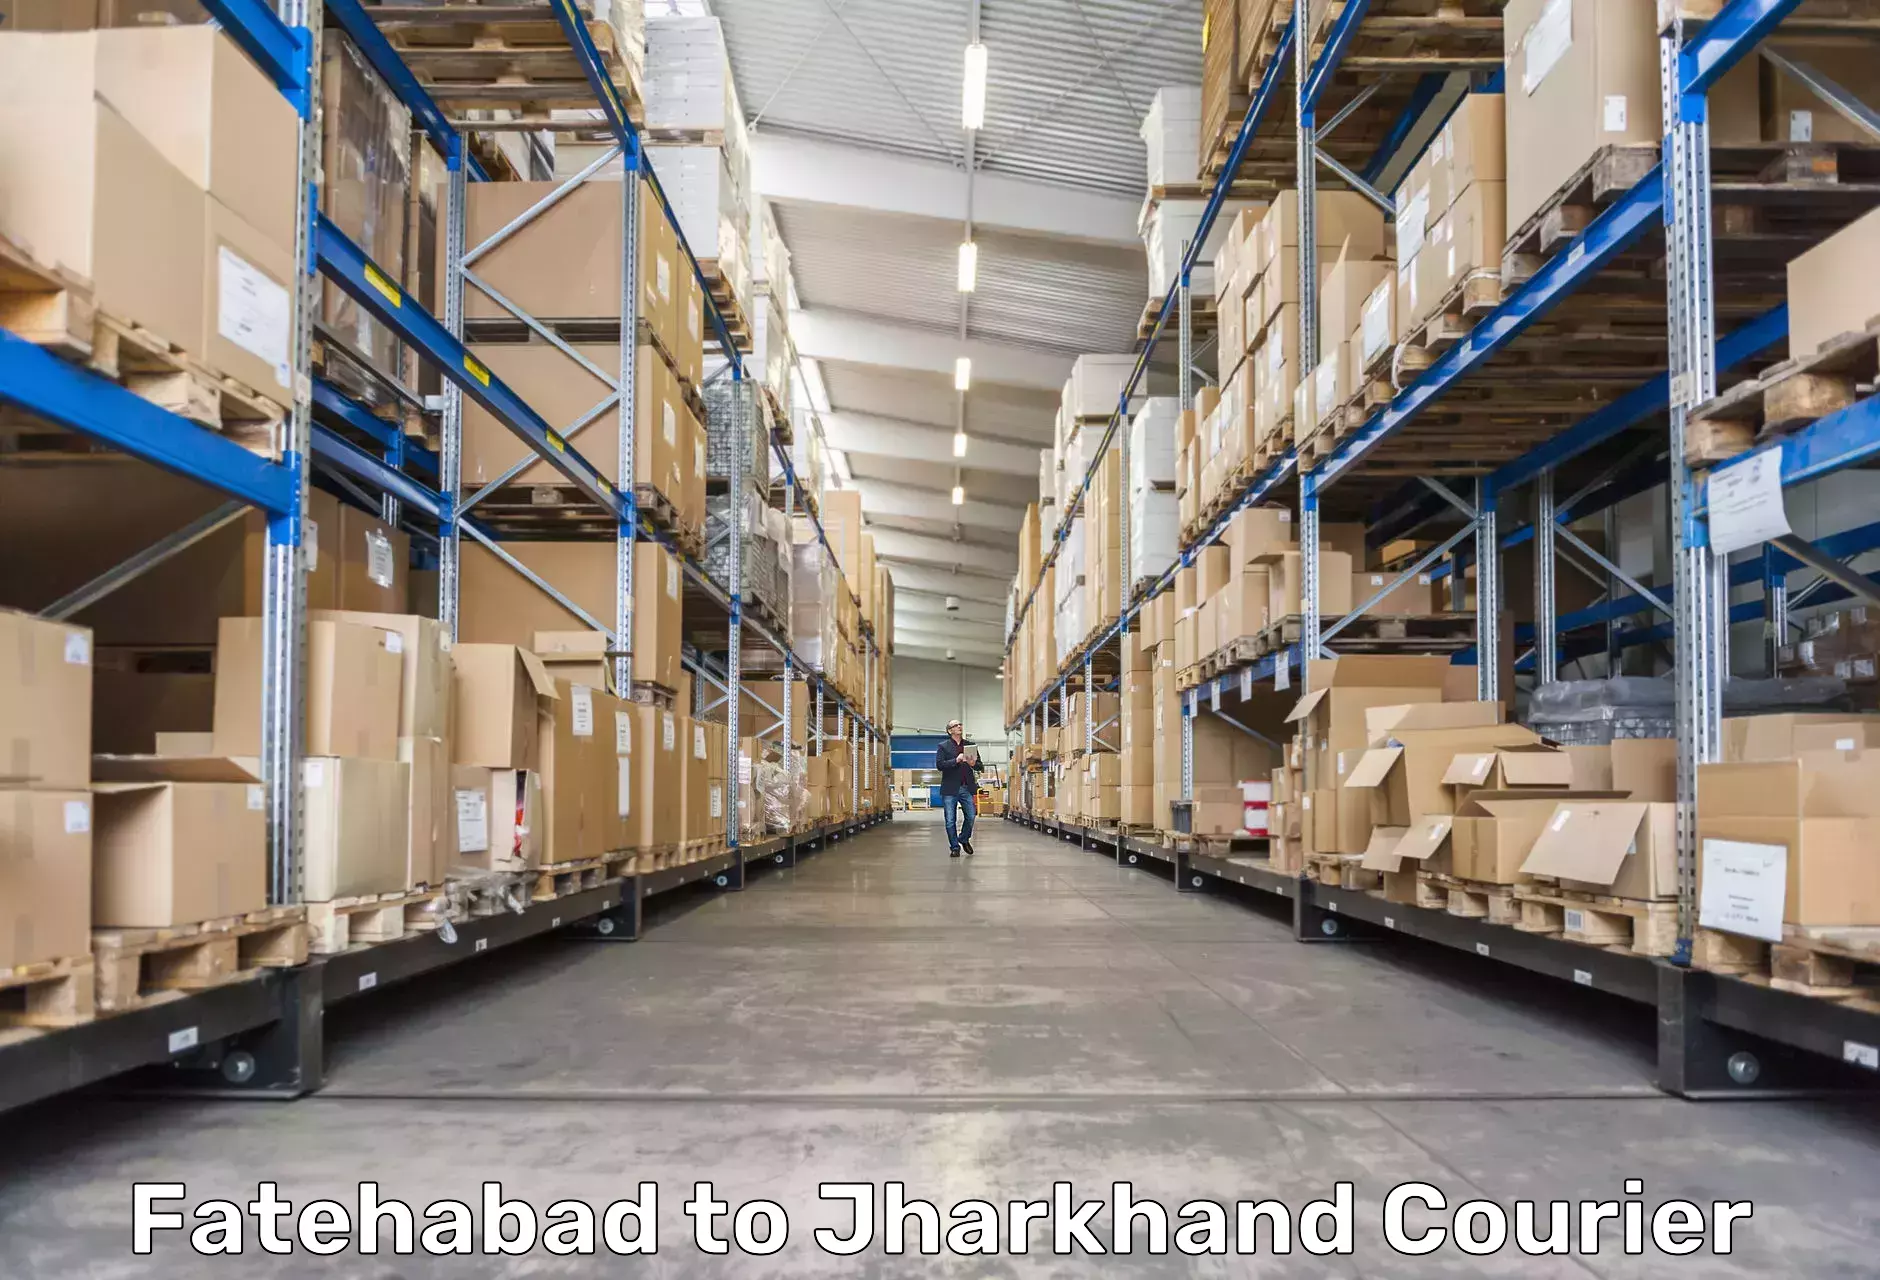 Pharmaceutical courier Fatehabad to Jharkhand